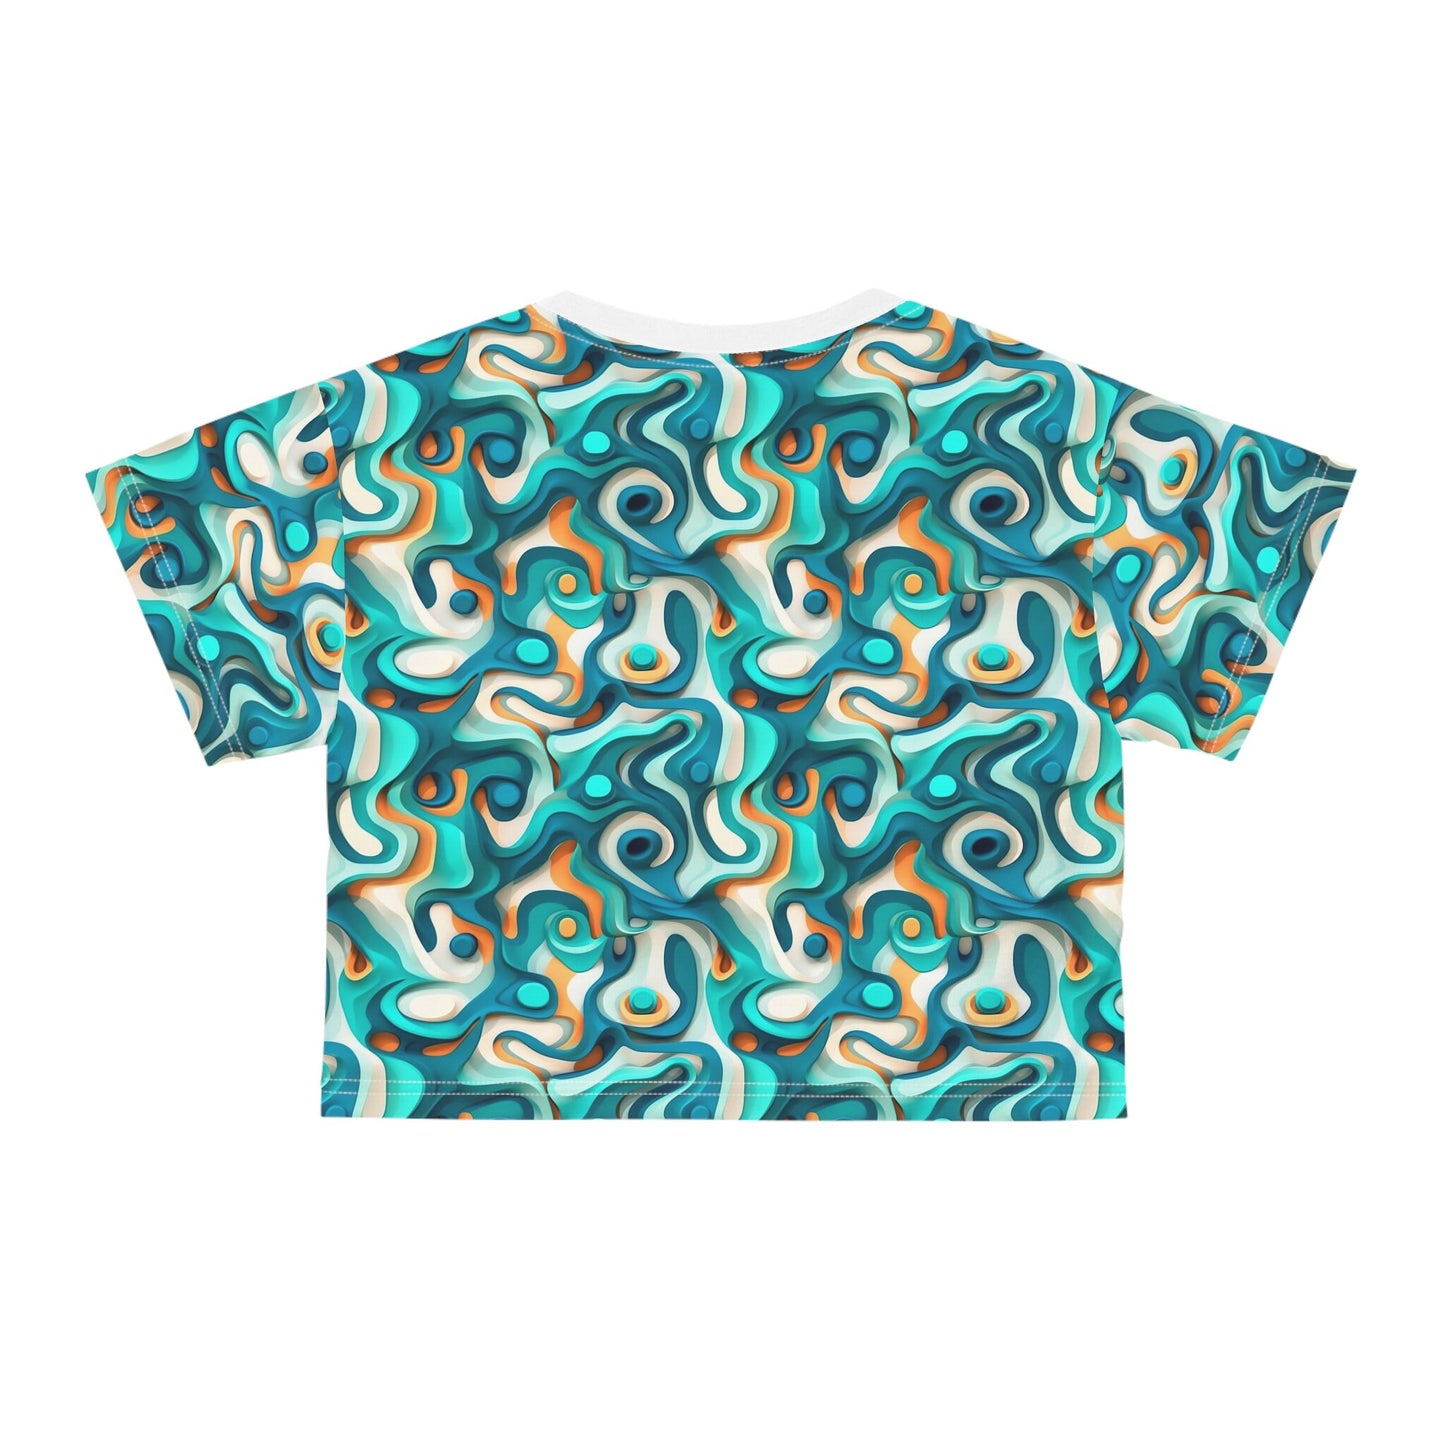 Crop Tee for Festivals, Raves, Events | Cool Flow